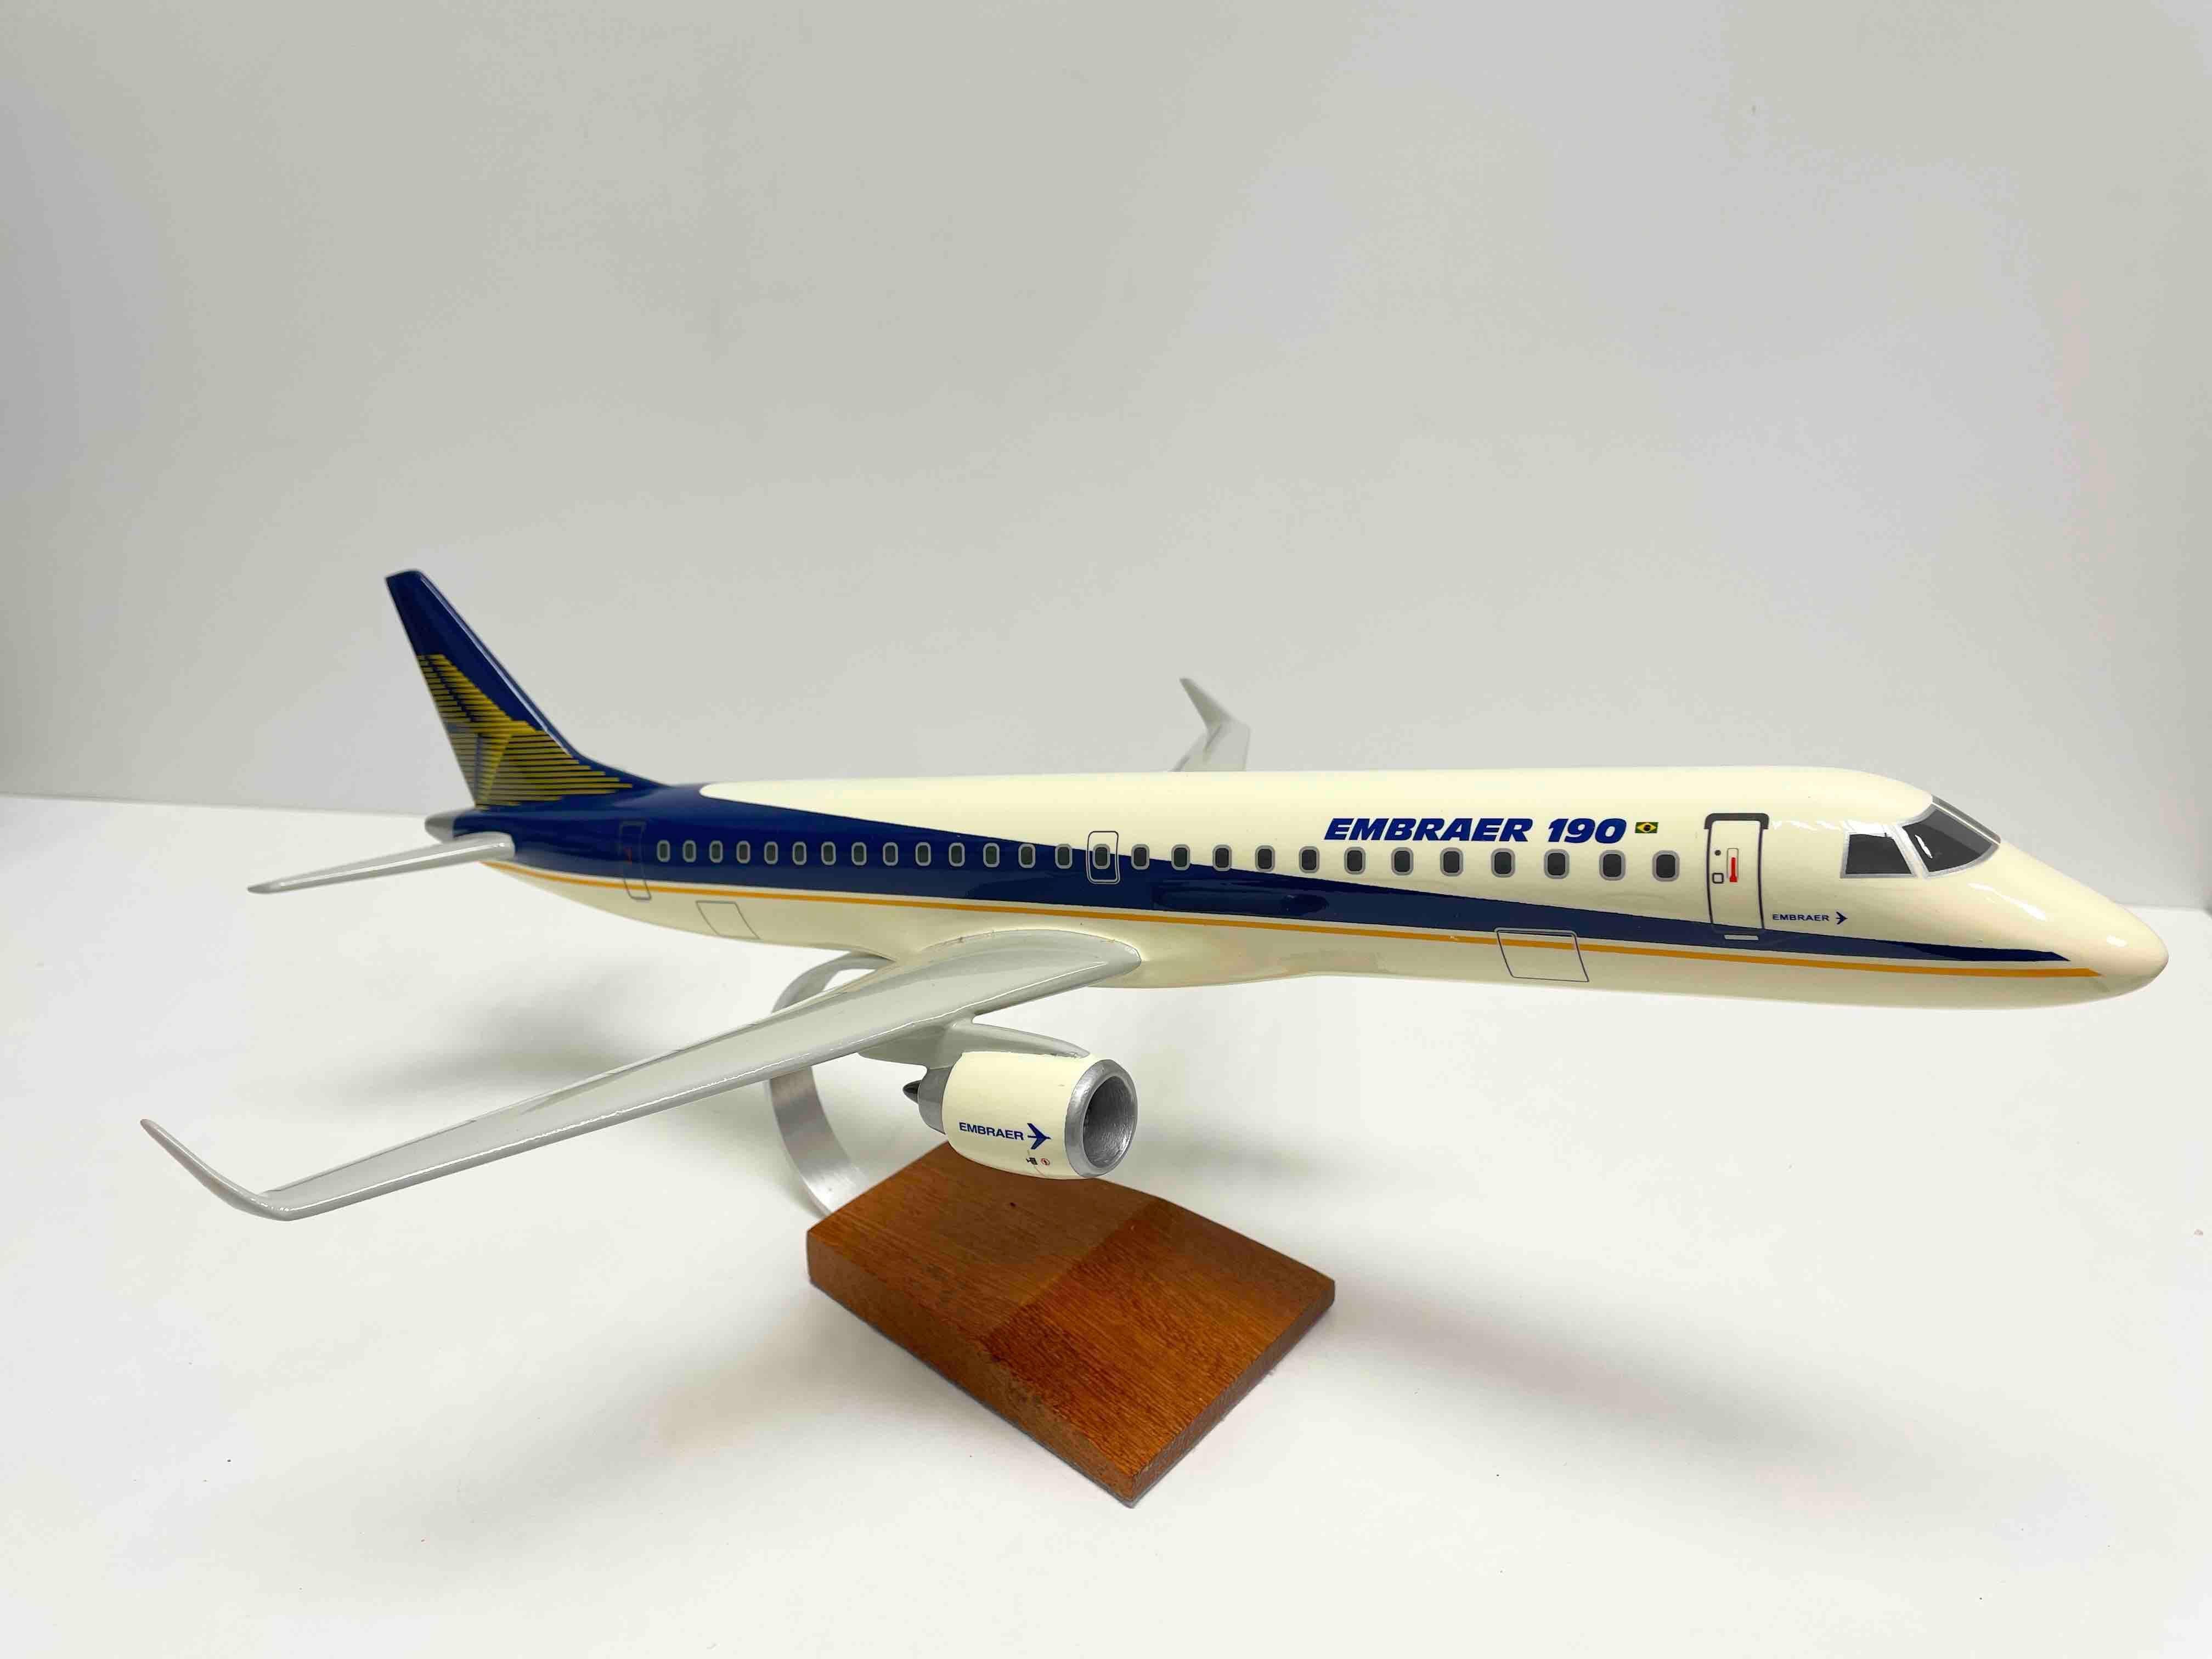 Hand-Crafted Embraer 190 Jet Airplane Aircraft Model Brazil For Sale